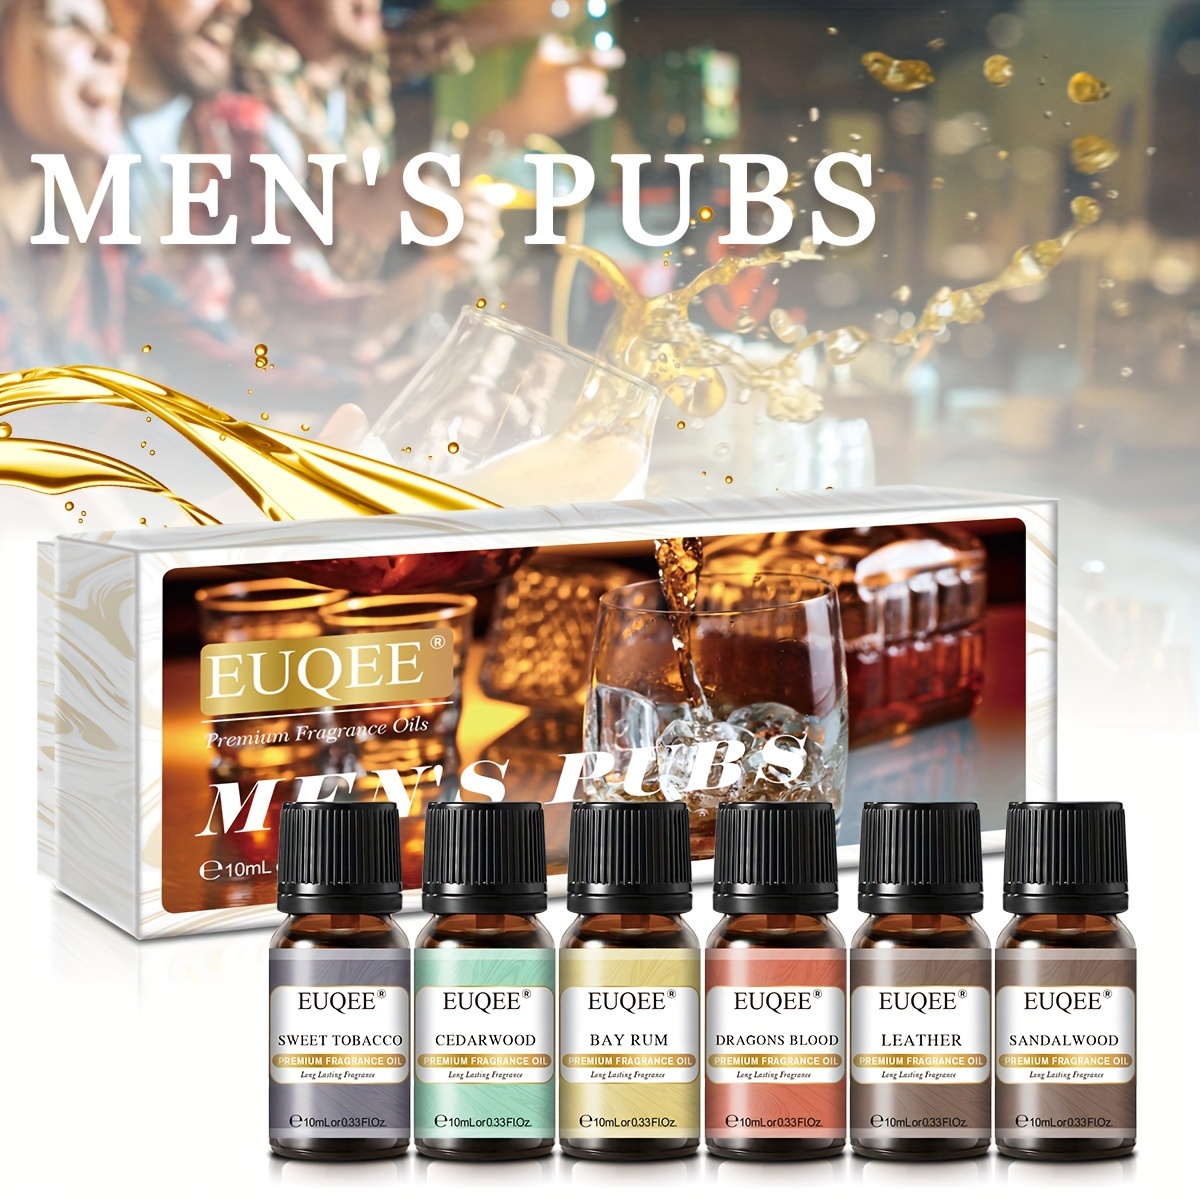  Gentlemen's Essential Oils Set - 6x10ML Mens Fragrance Oil for  Candle Making, Diffuser - Sandalwood, Cedar, Leather, Sweet Tobacco, Bay  Rum, Cologne Aromatherapy Oils for Men : Health & Household